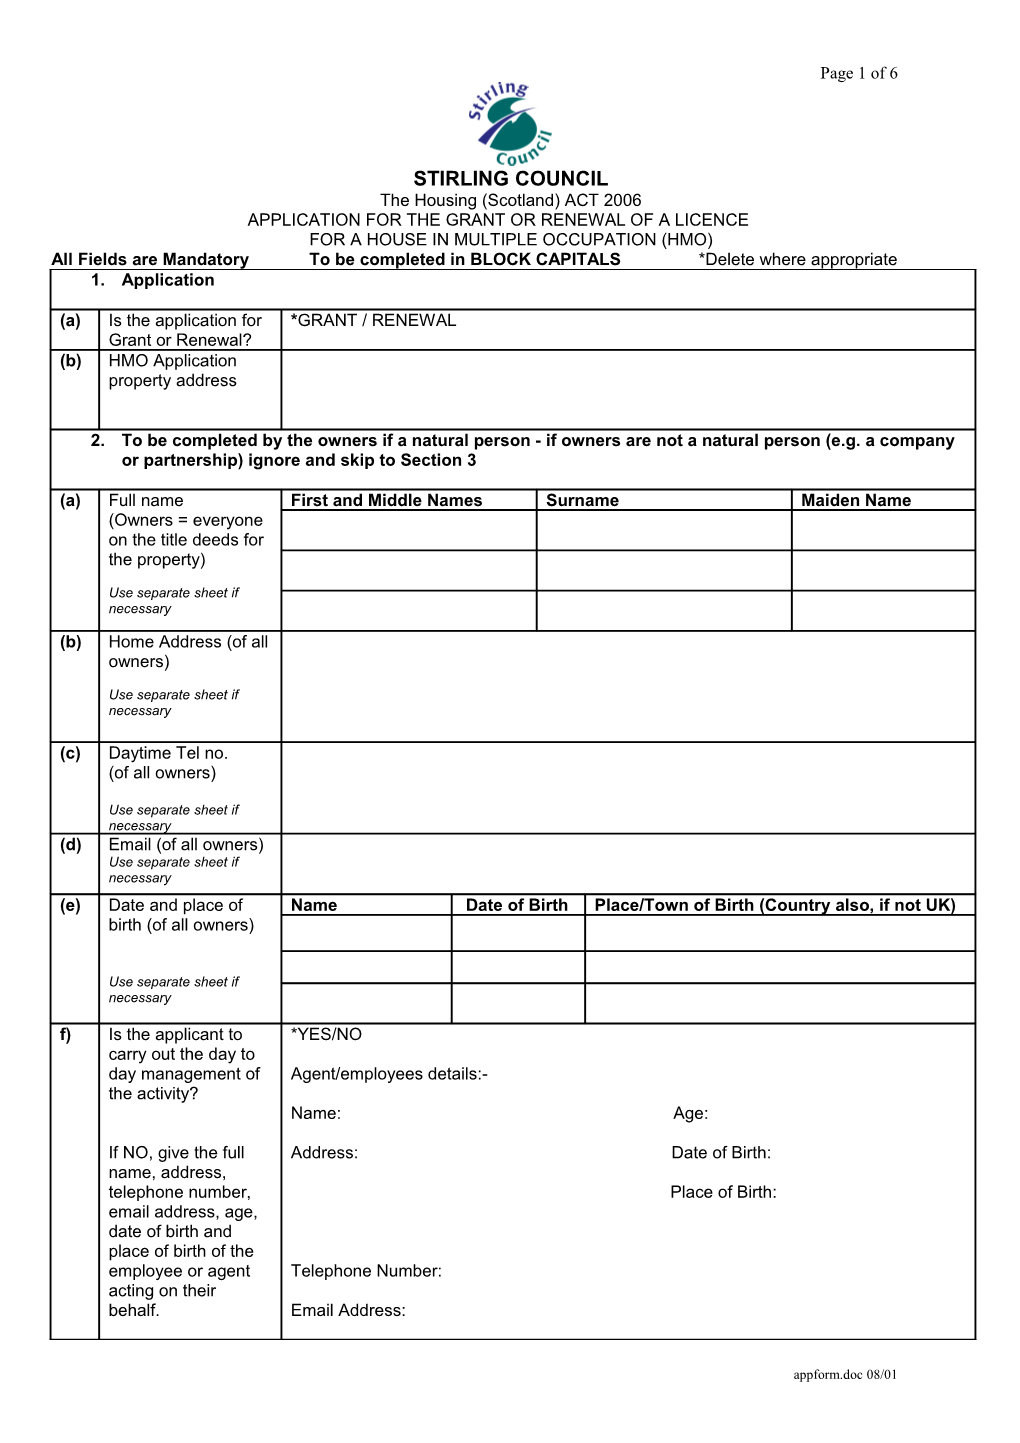 Application for the Grant Or Renewal of a Licence